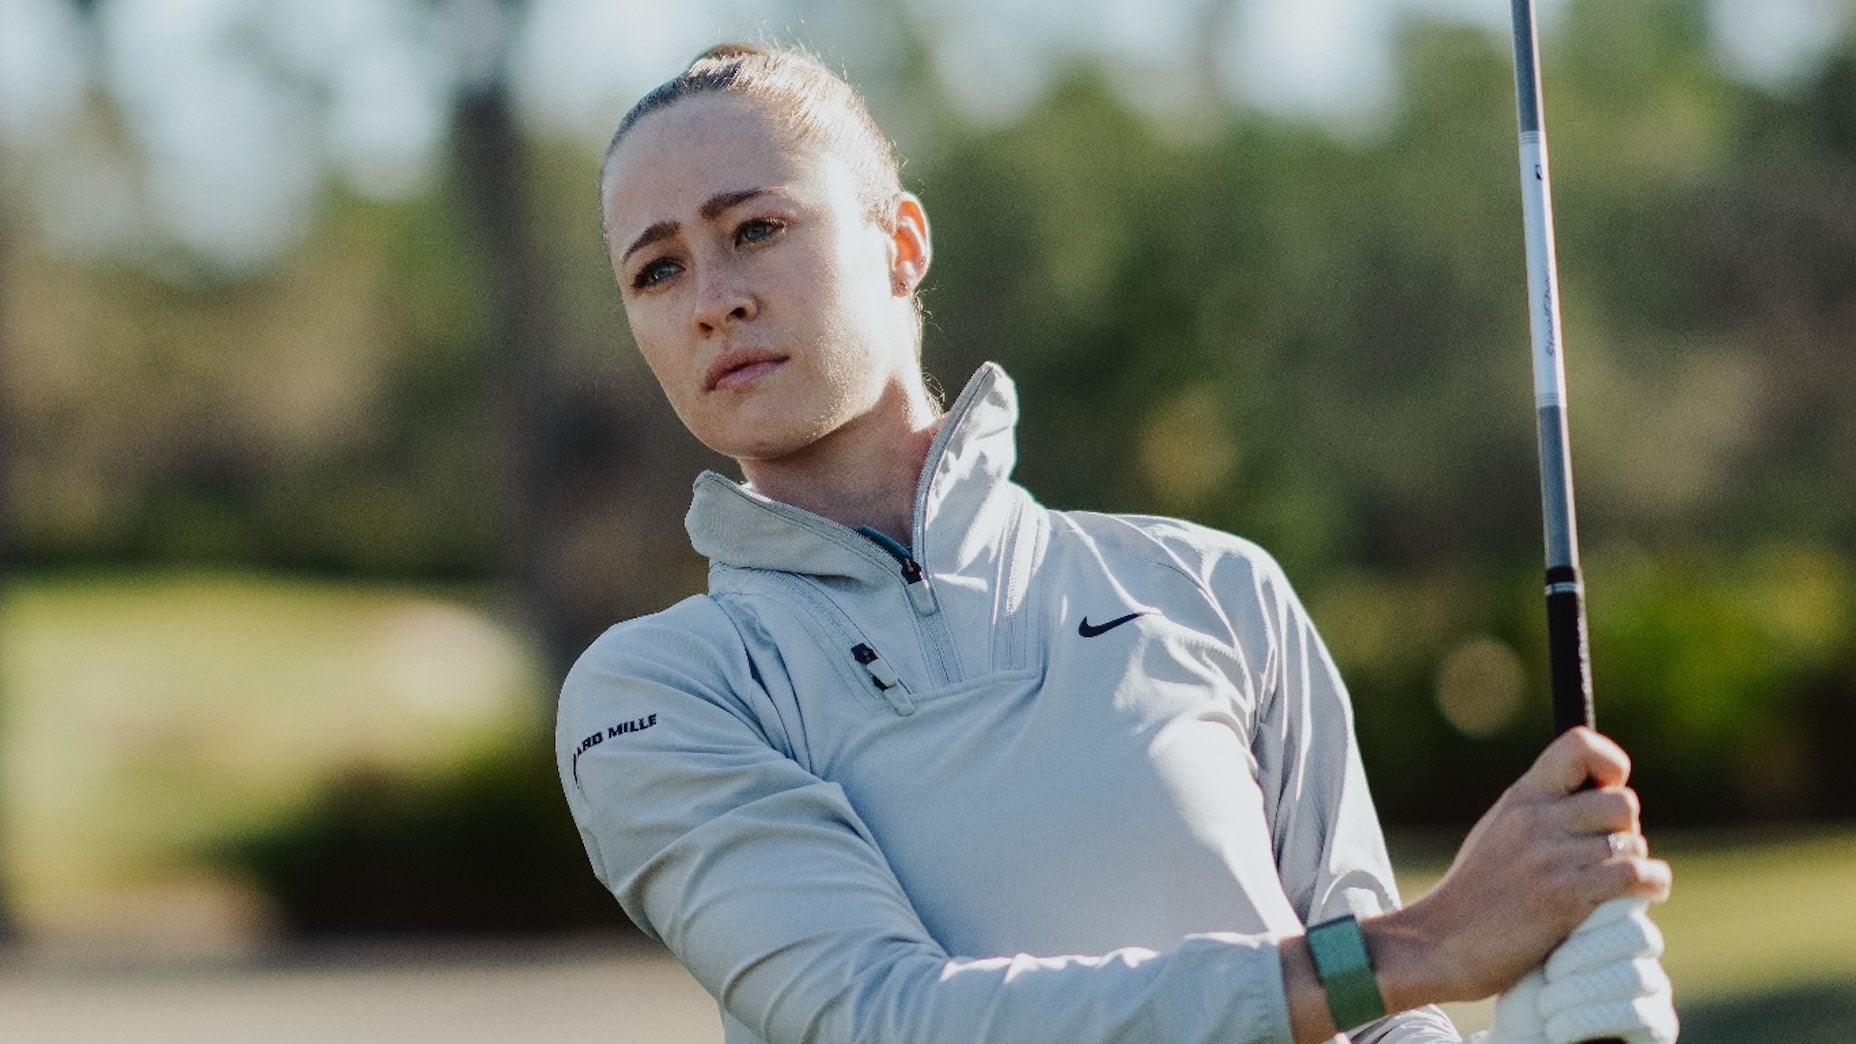 Emigrar la seguridad Aislar Nelly Korda signs Nike deal — and it's just the start of big changes